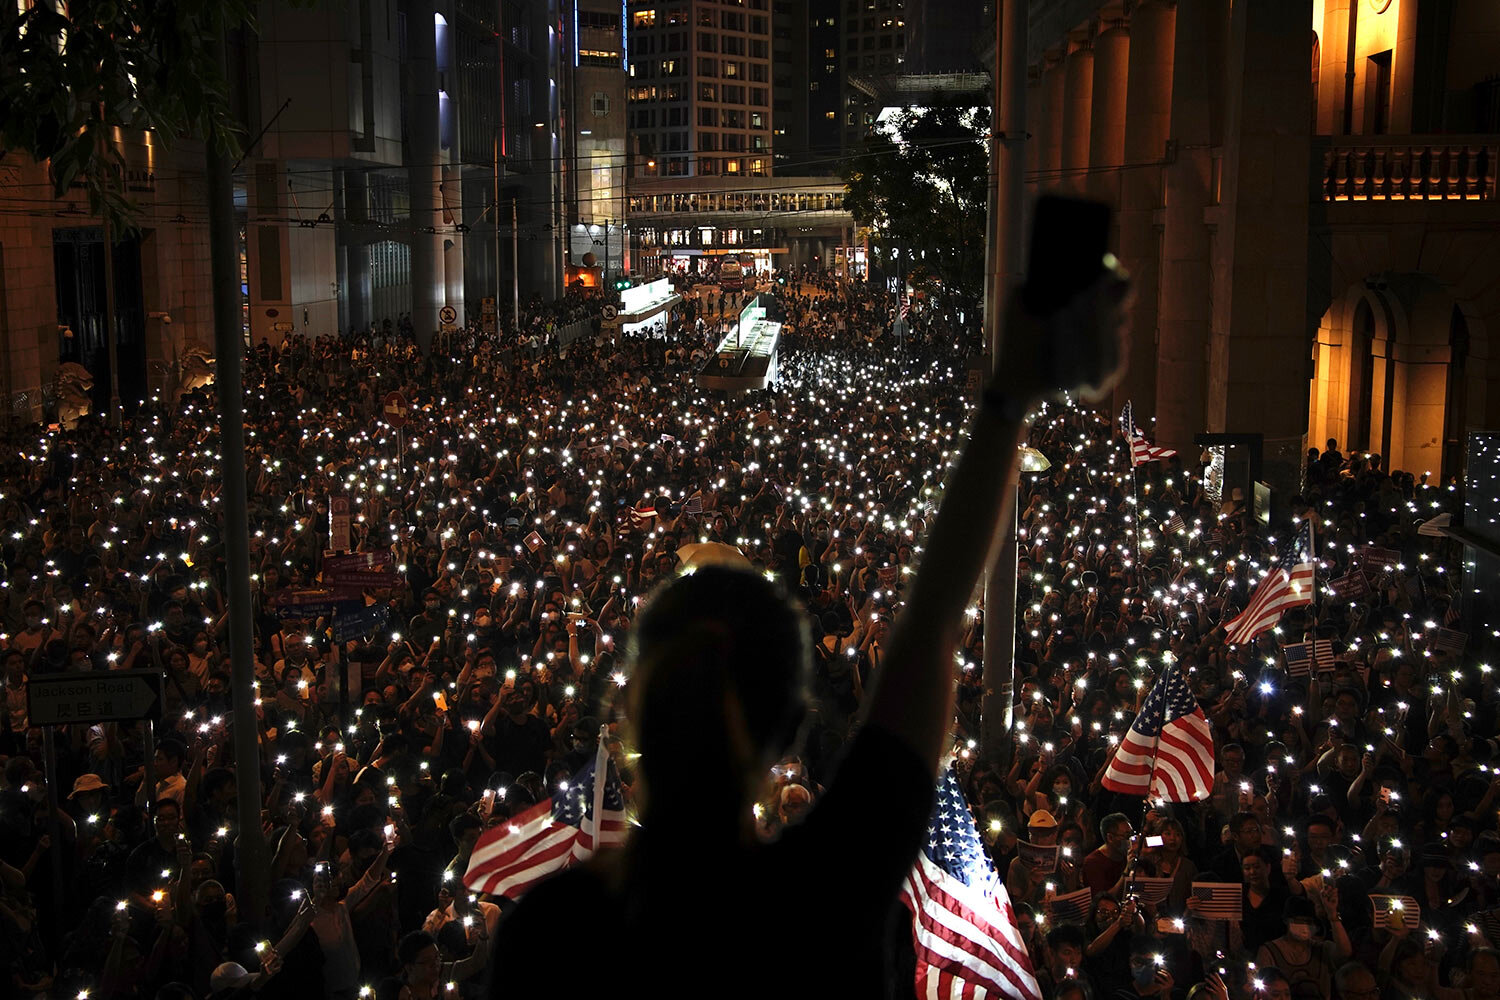  Protestors light their torches during a peaceful rally in central Hong Kong's business district, Monday, Oct. 14, 2019. The protests that started in June over a now-shelved extradition bill have since snowballed into an anti-China campaign amid ange